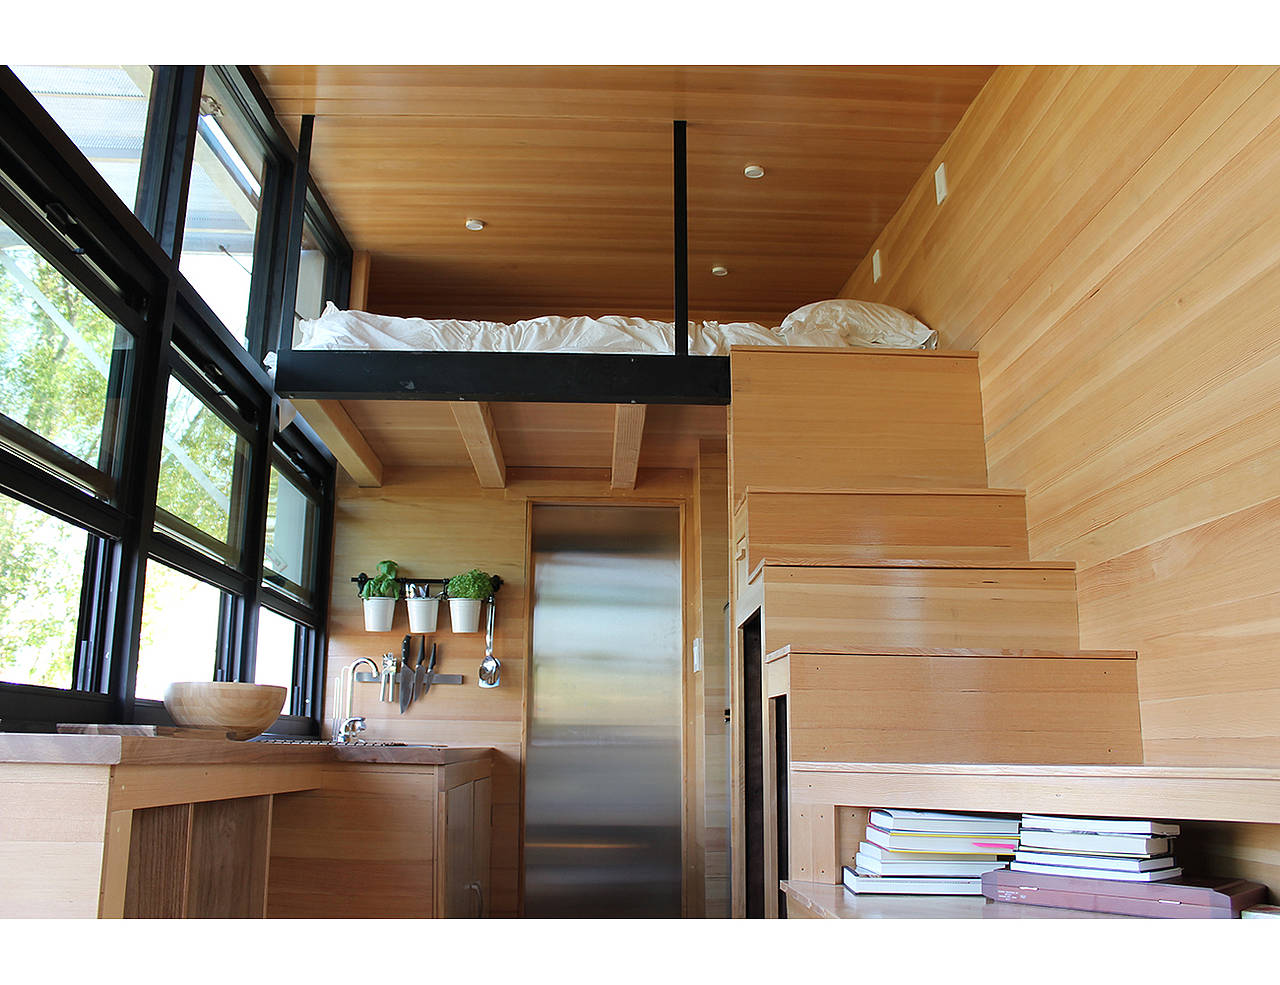 Architects find big satisfaction in tiny house | NDSU News ...